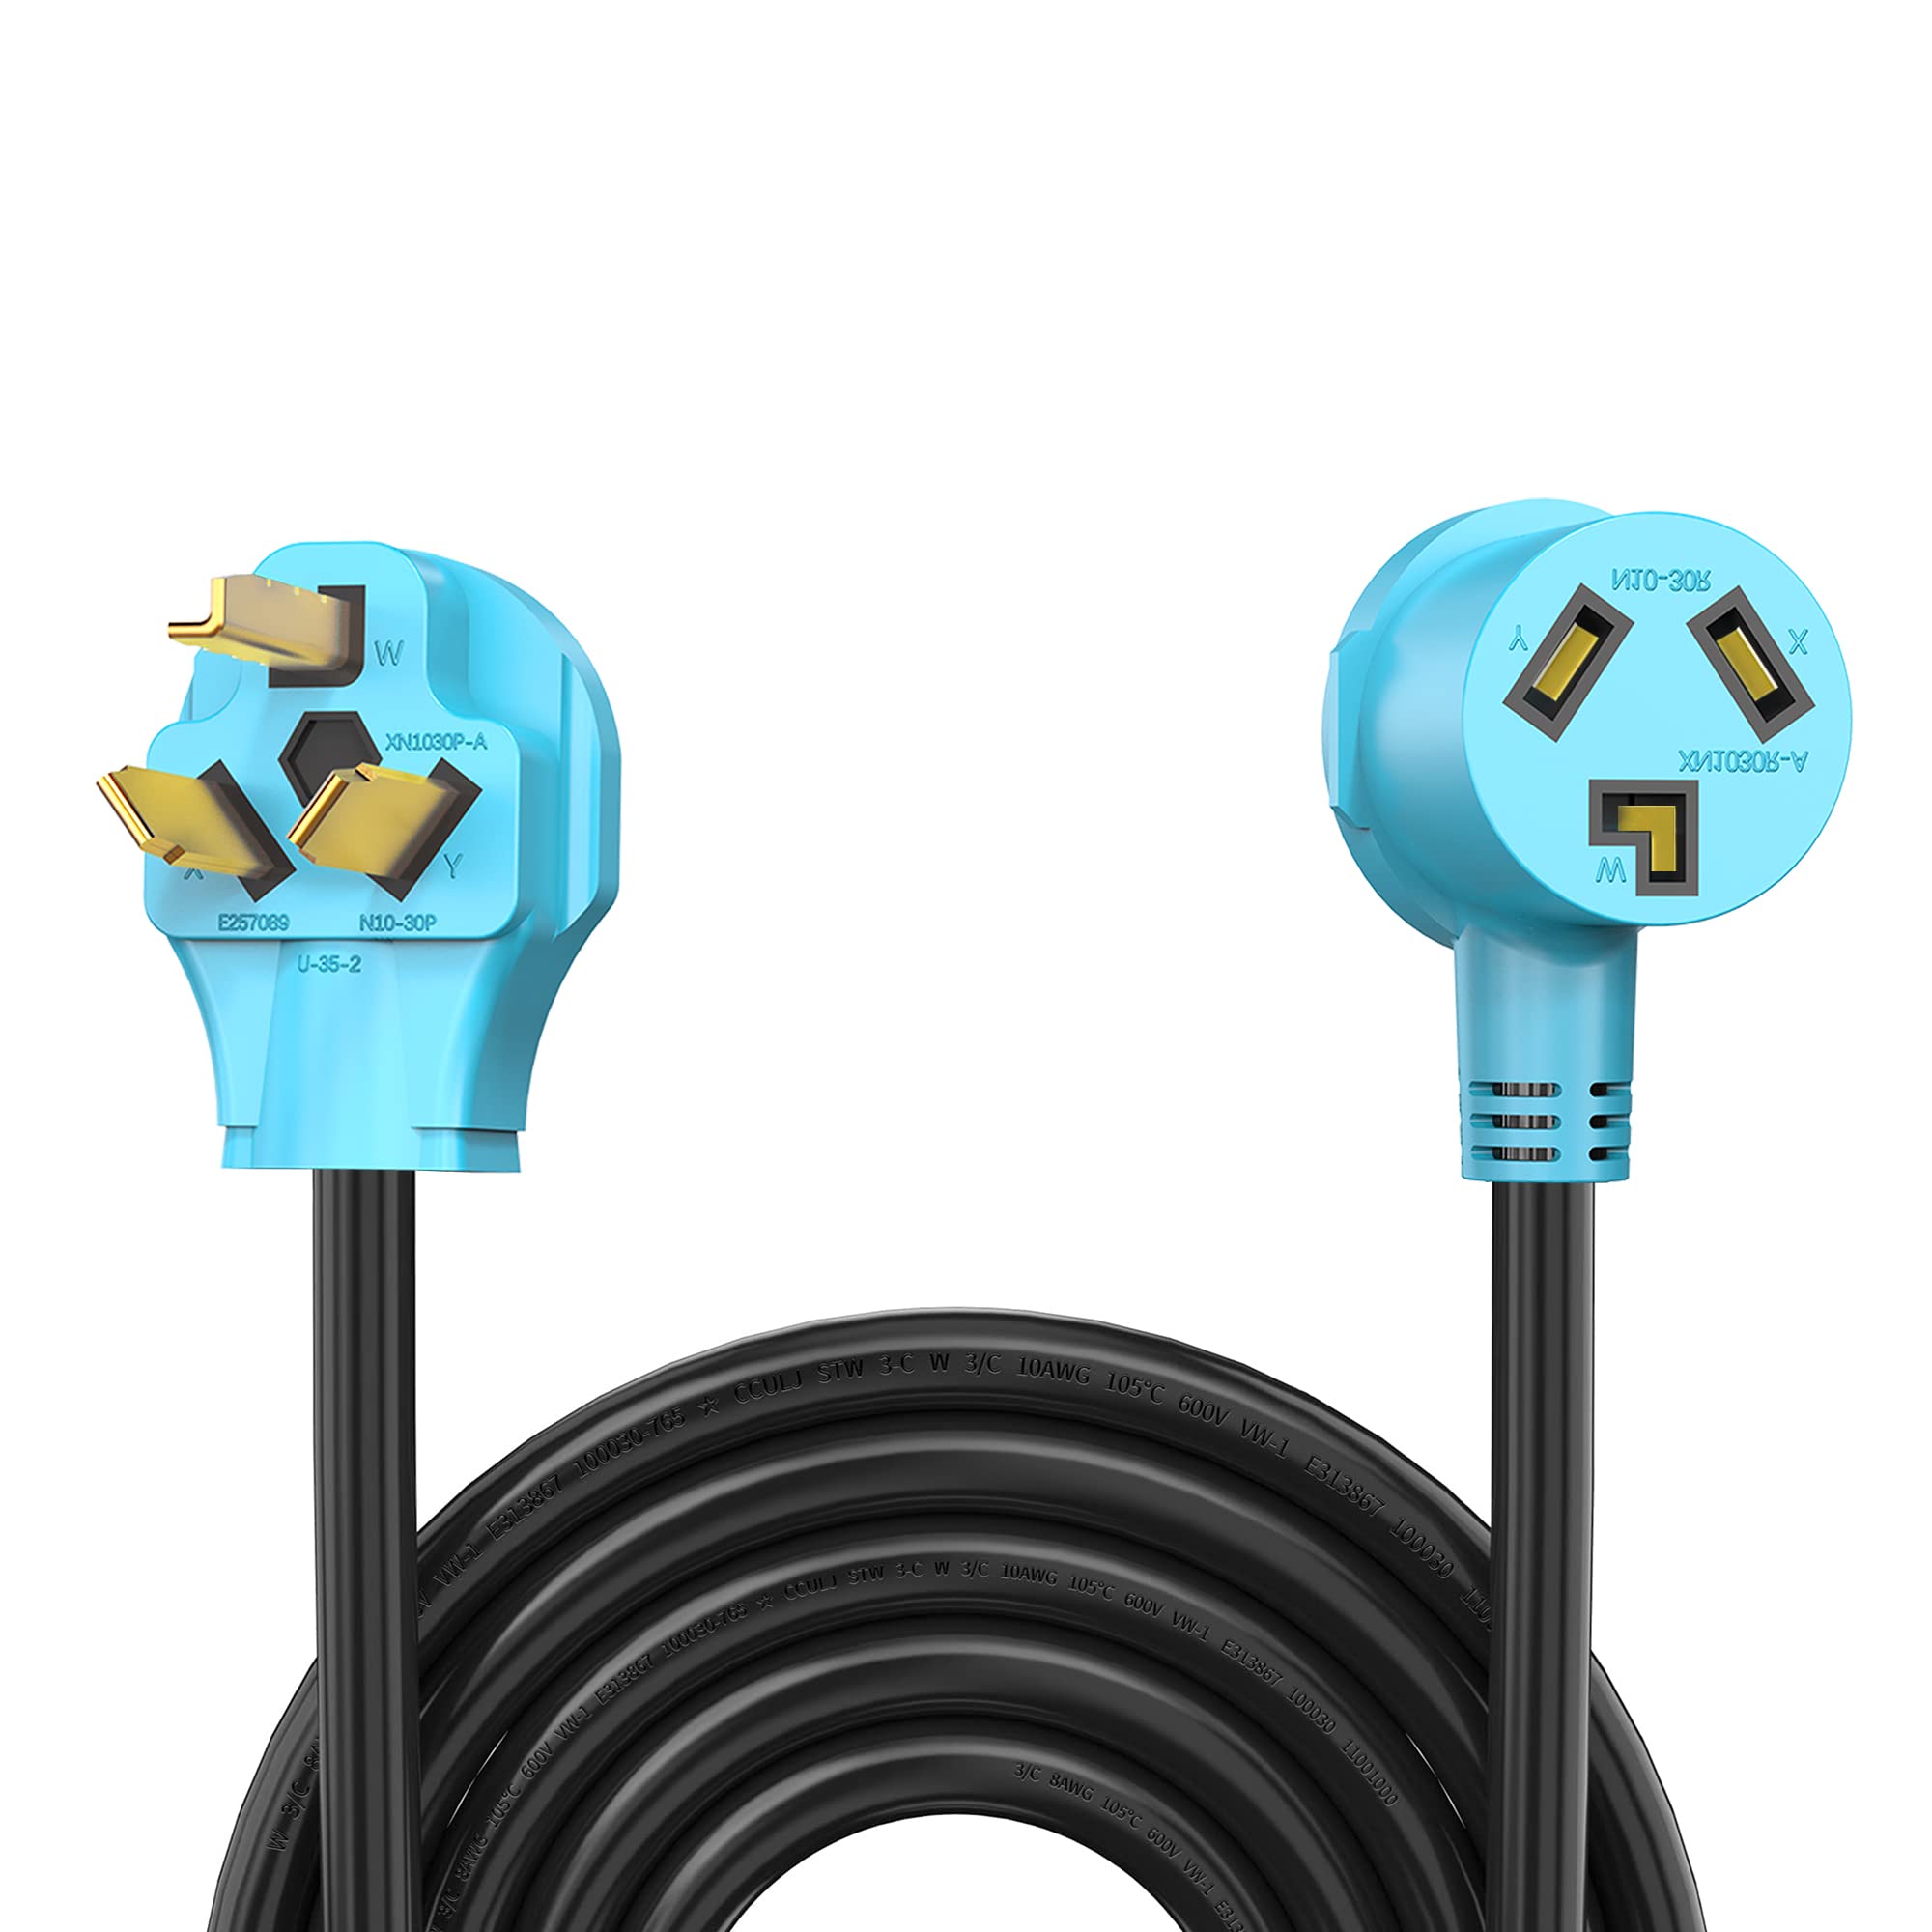 CircleCord UL Listed 3 Prong 25 Feet Dryer/EV Extension Cord, 30 Amp NEMA 10-30P/R, Suit for Level 2 EV Charging Such as Tesla M